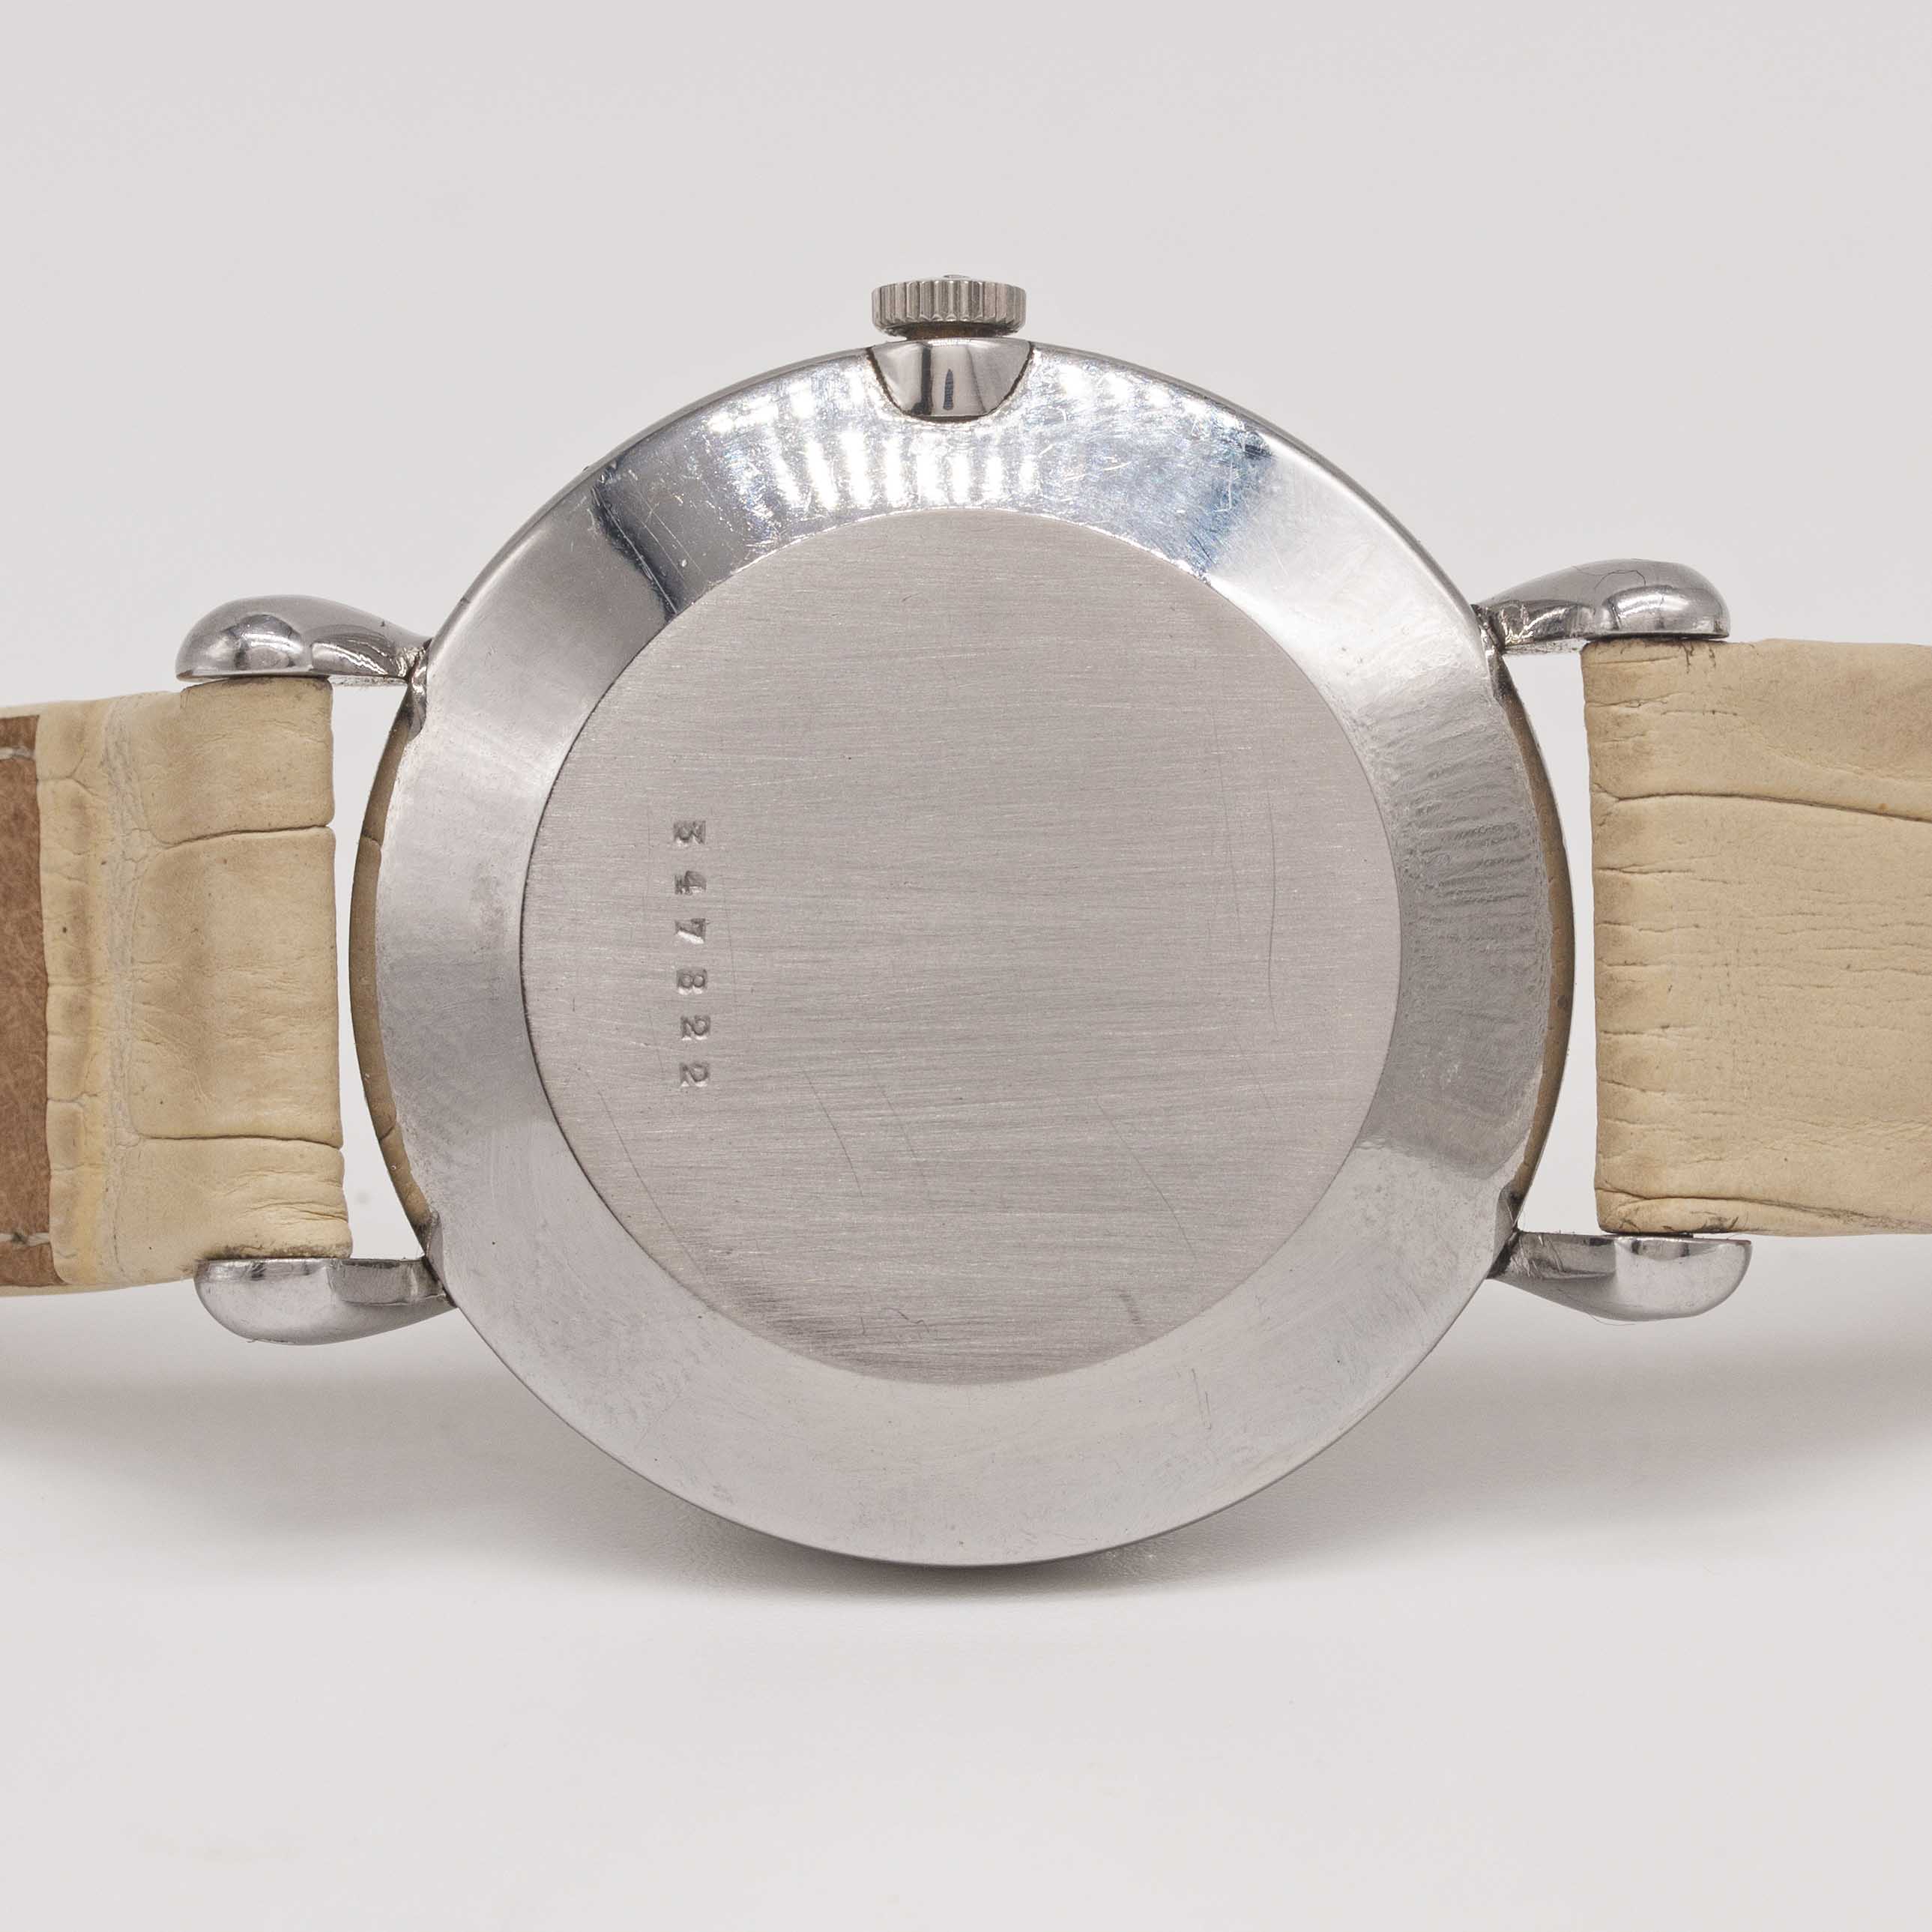 A GENTLEMAN'S LARGE SIZE STAINLESS STEEL JAEGER LECOULTRE TRIPLE CALENDAR WRIST WATCH CIRCA 1940s, - Image 5 of 9